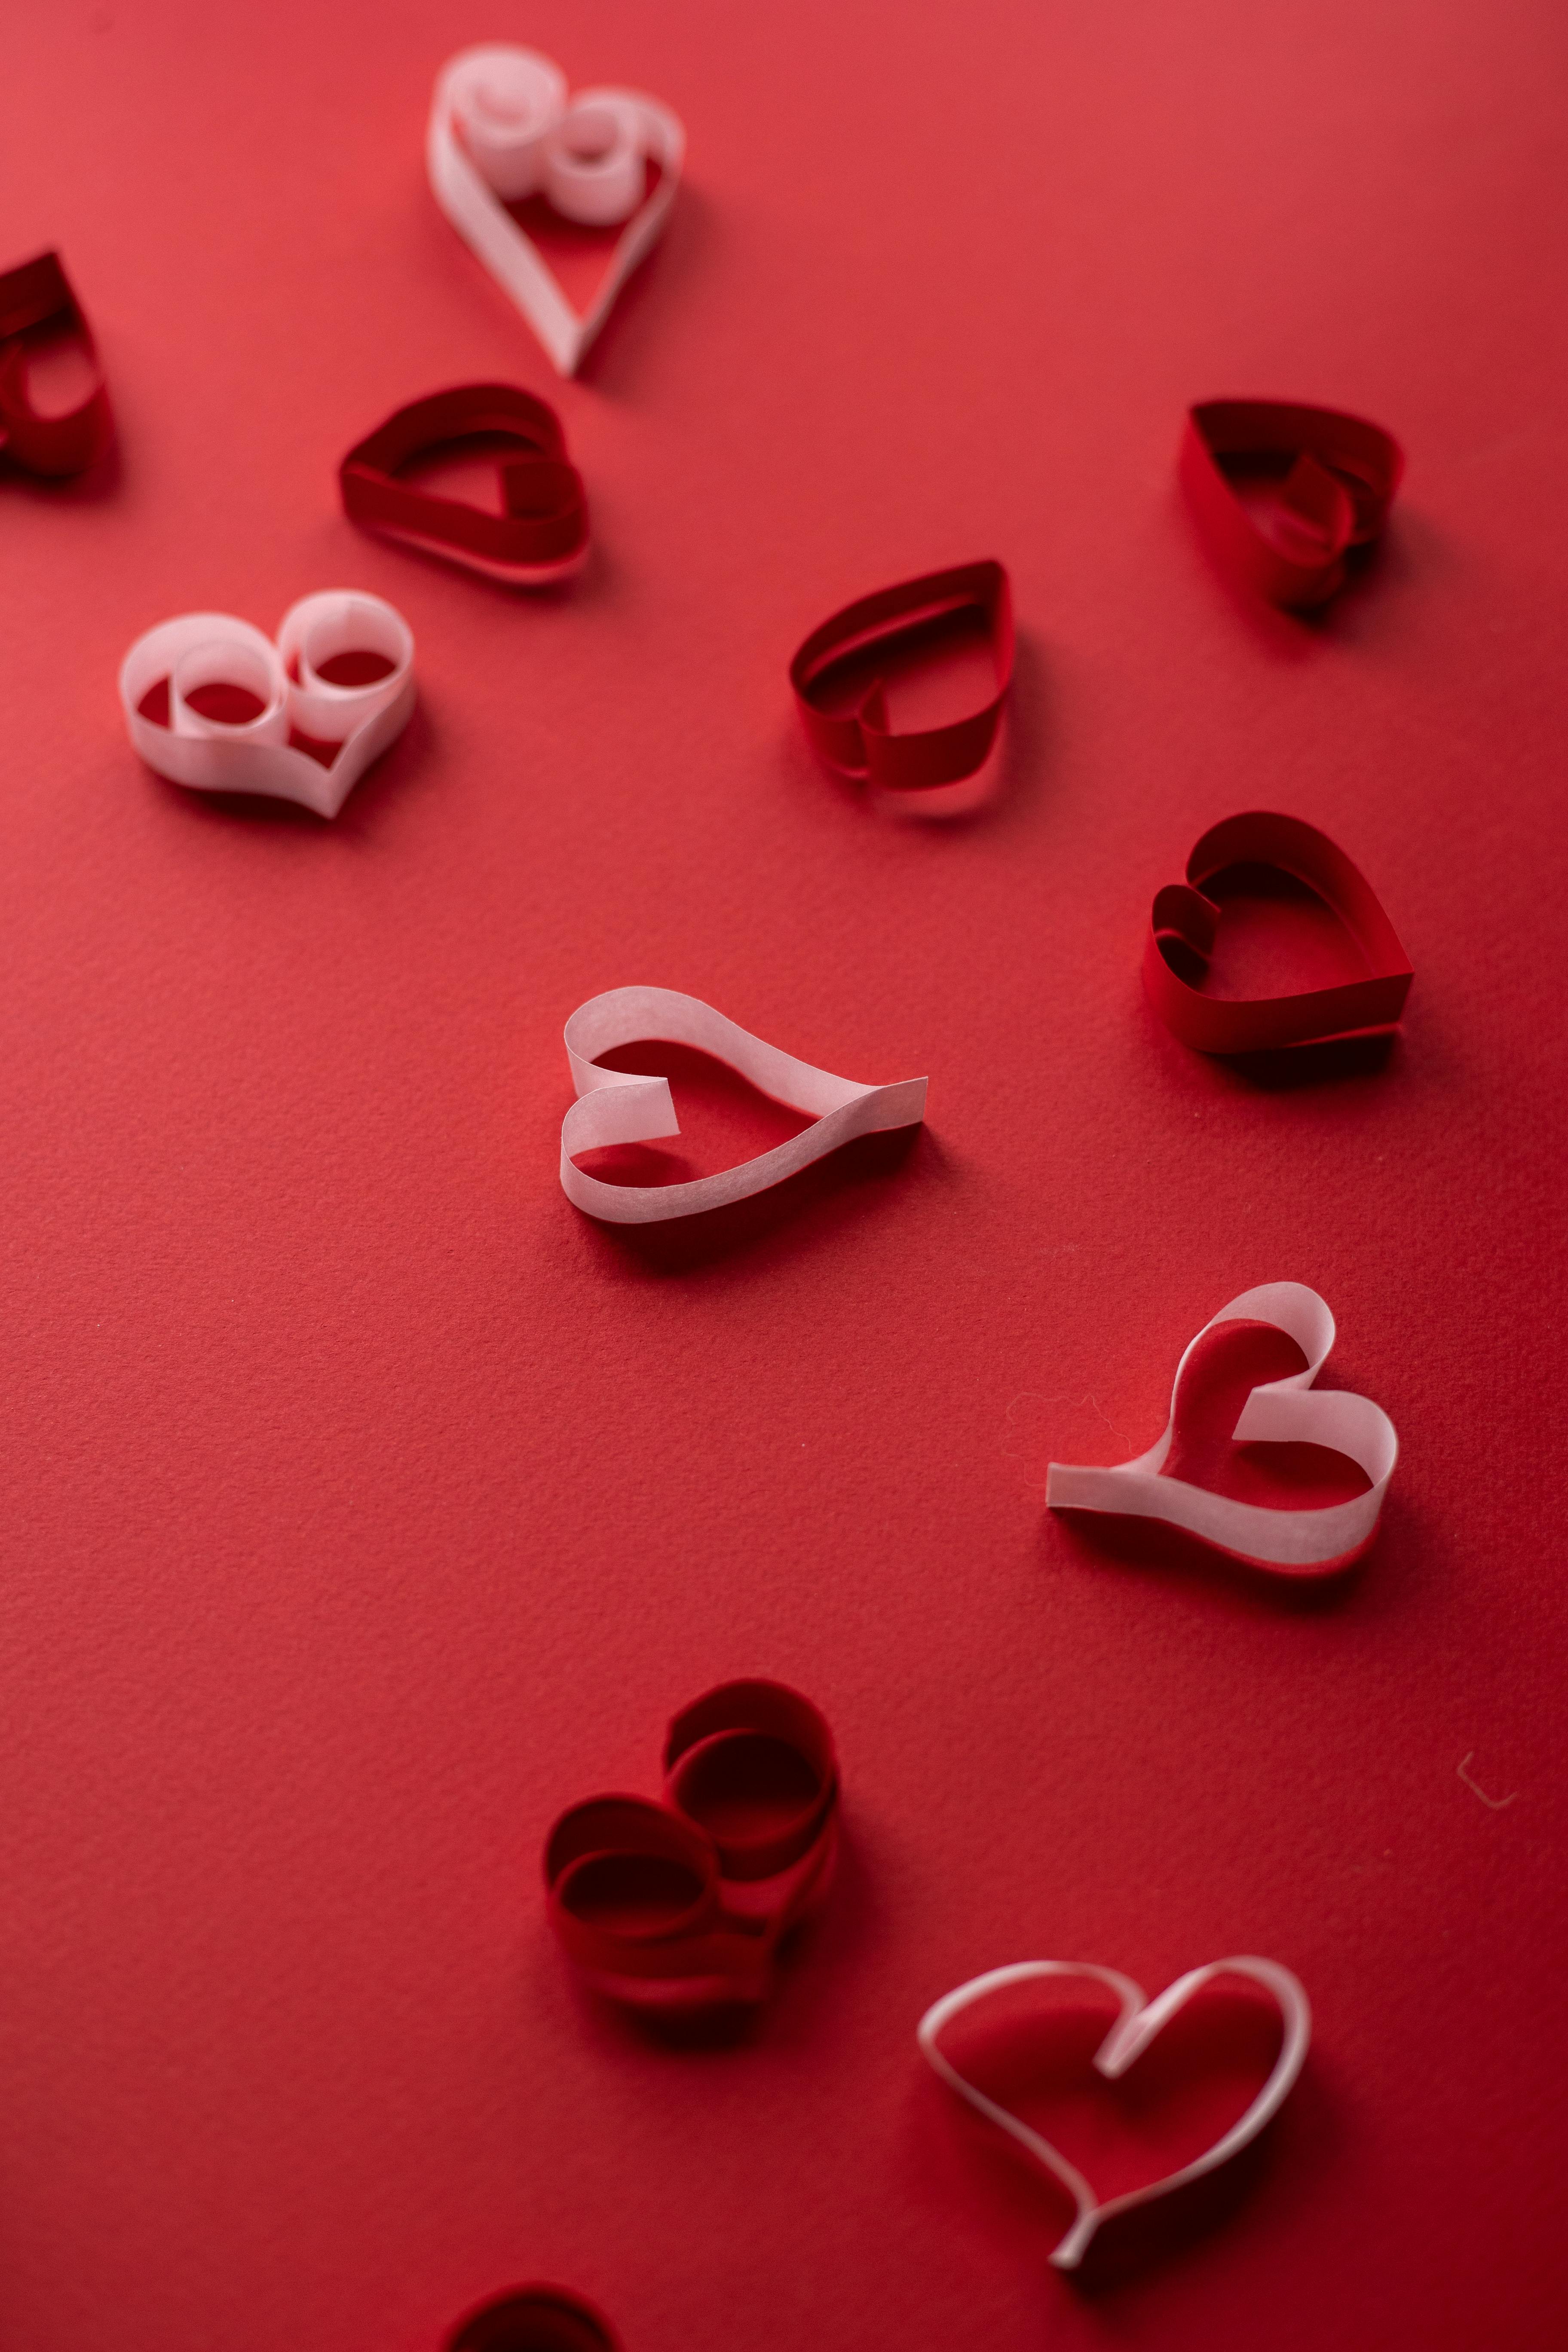 Small paper hearts for Valentines Day on red background · Free Stock Photo